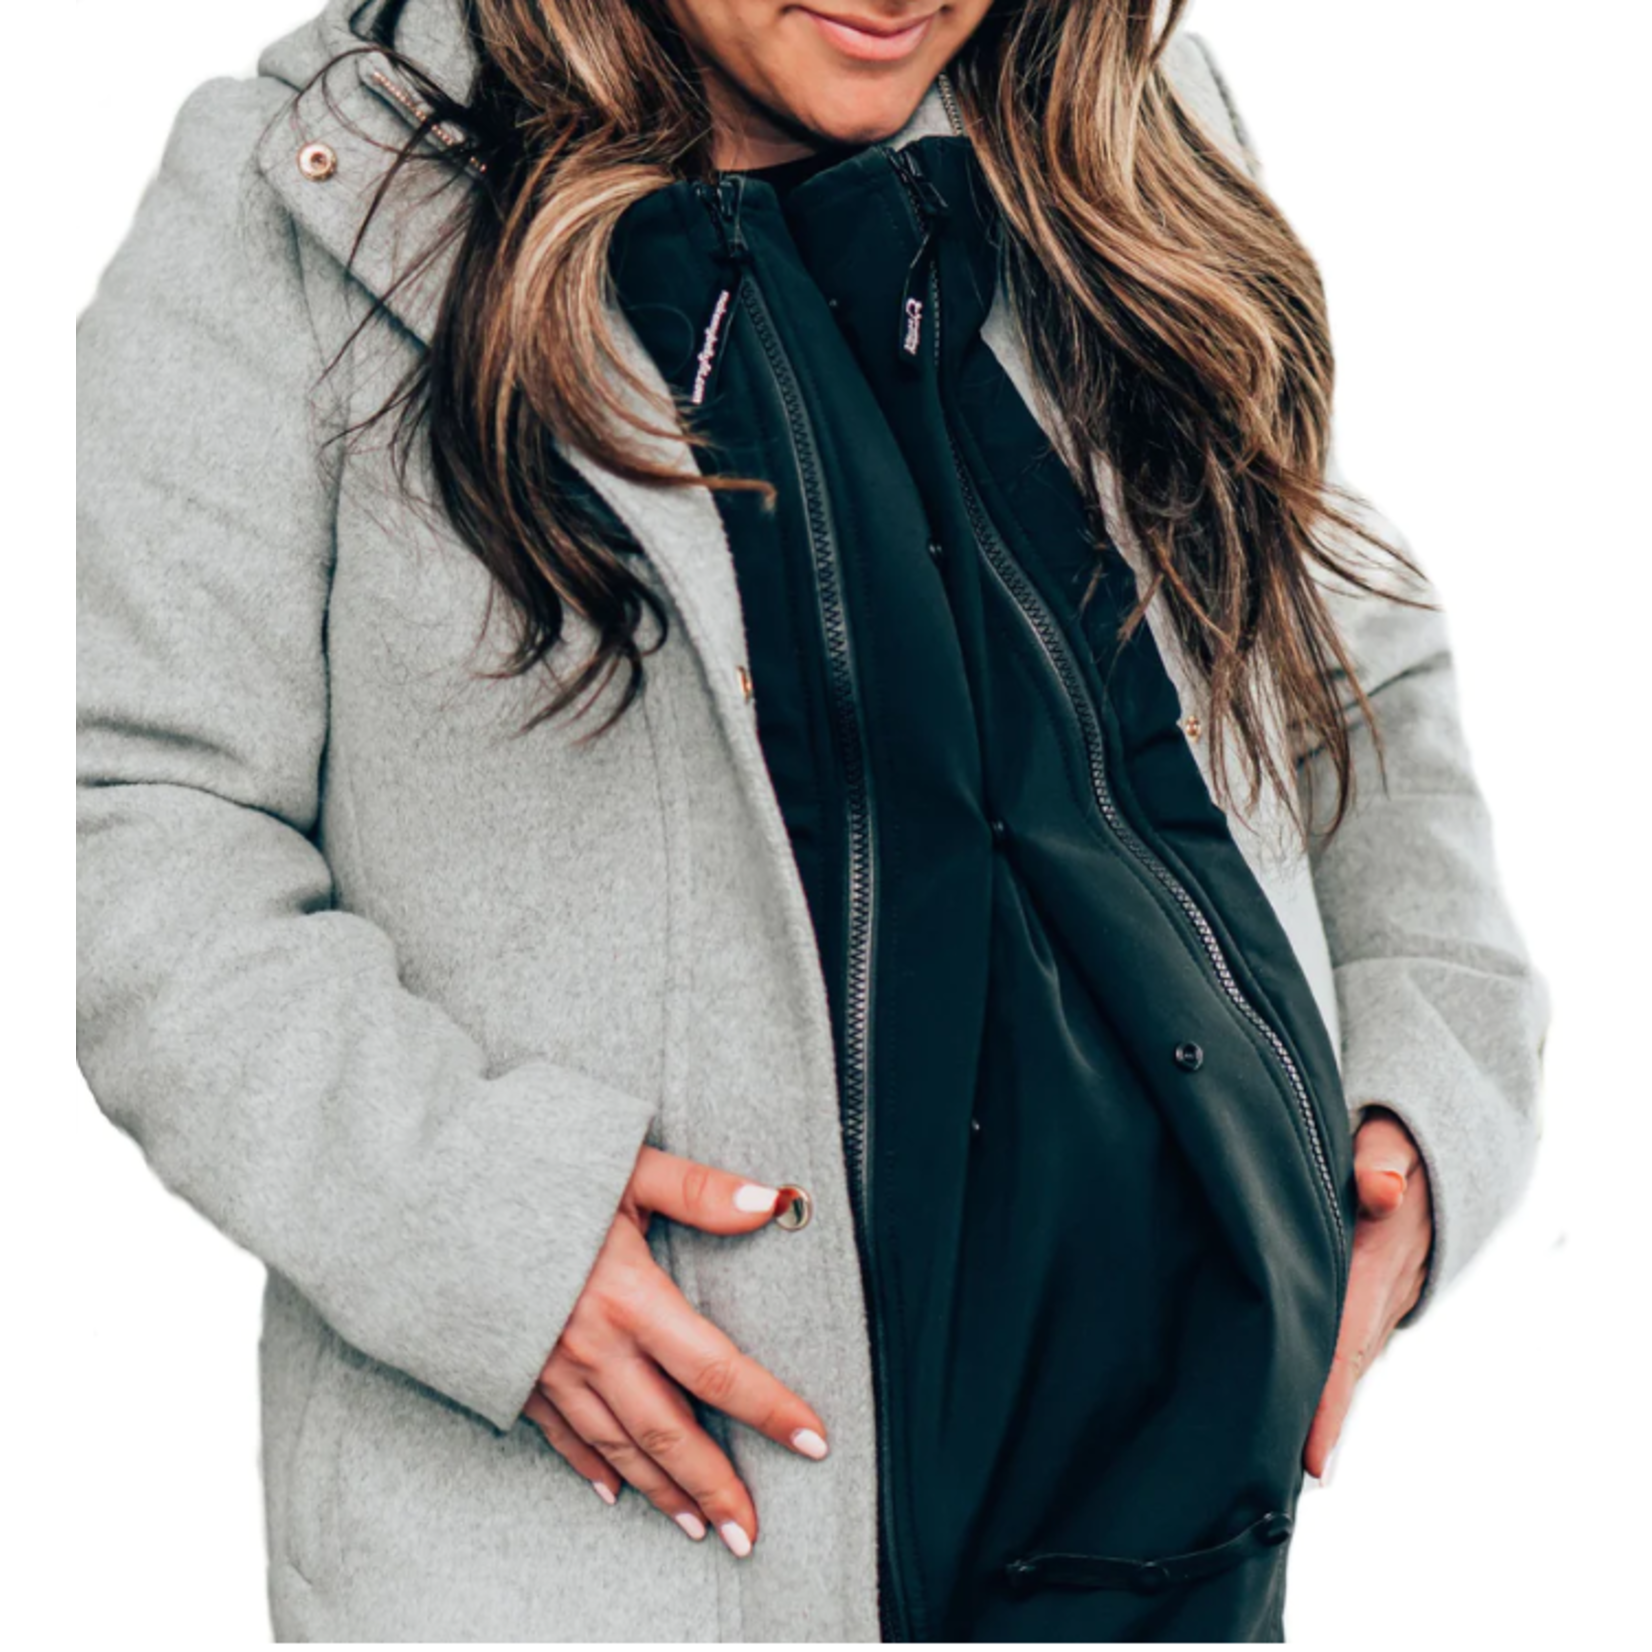 MAKE MY BELLY FIT MAKE MY BELLY FIT UNIVERSAL JACKET EXTENDER